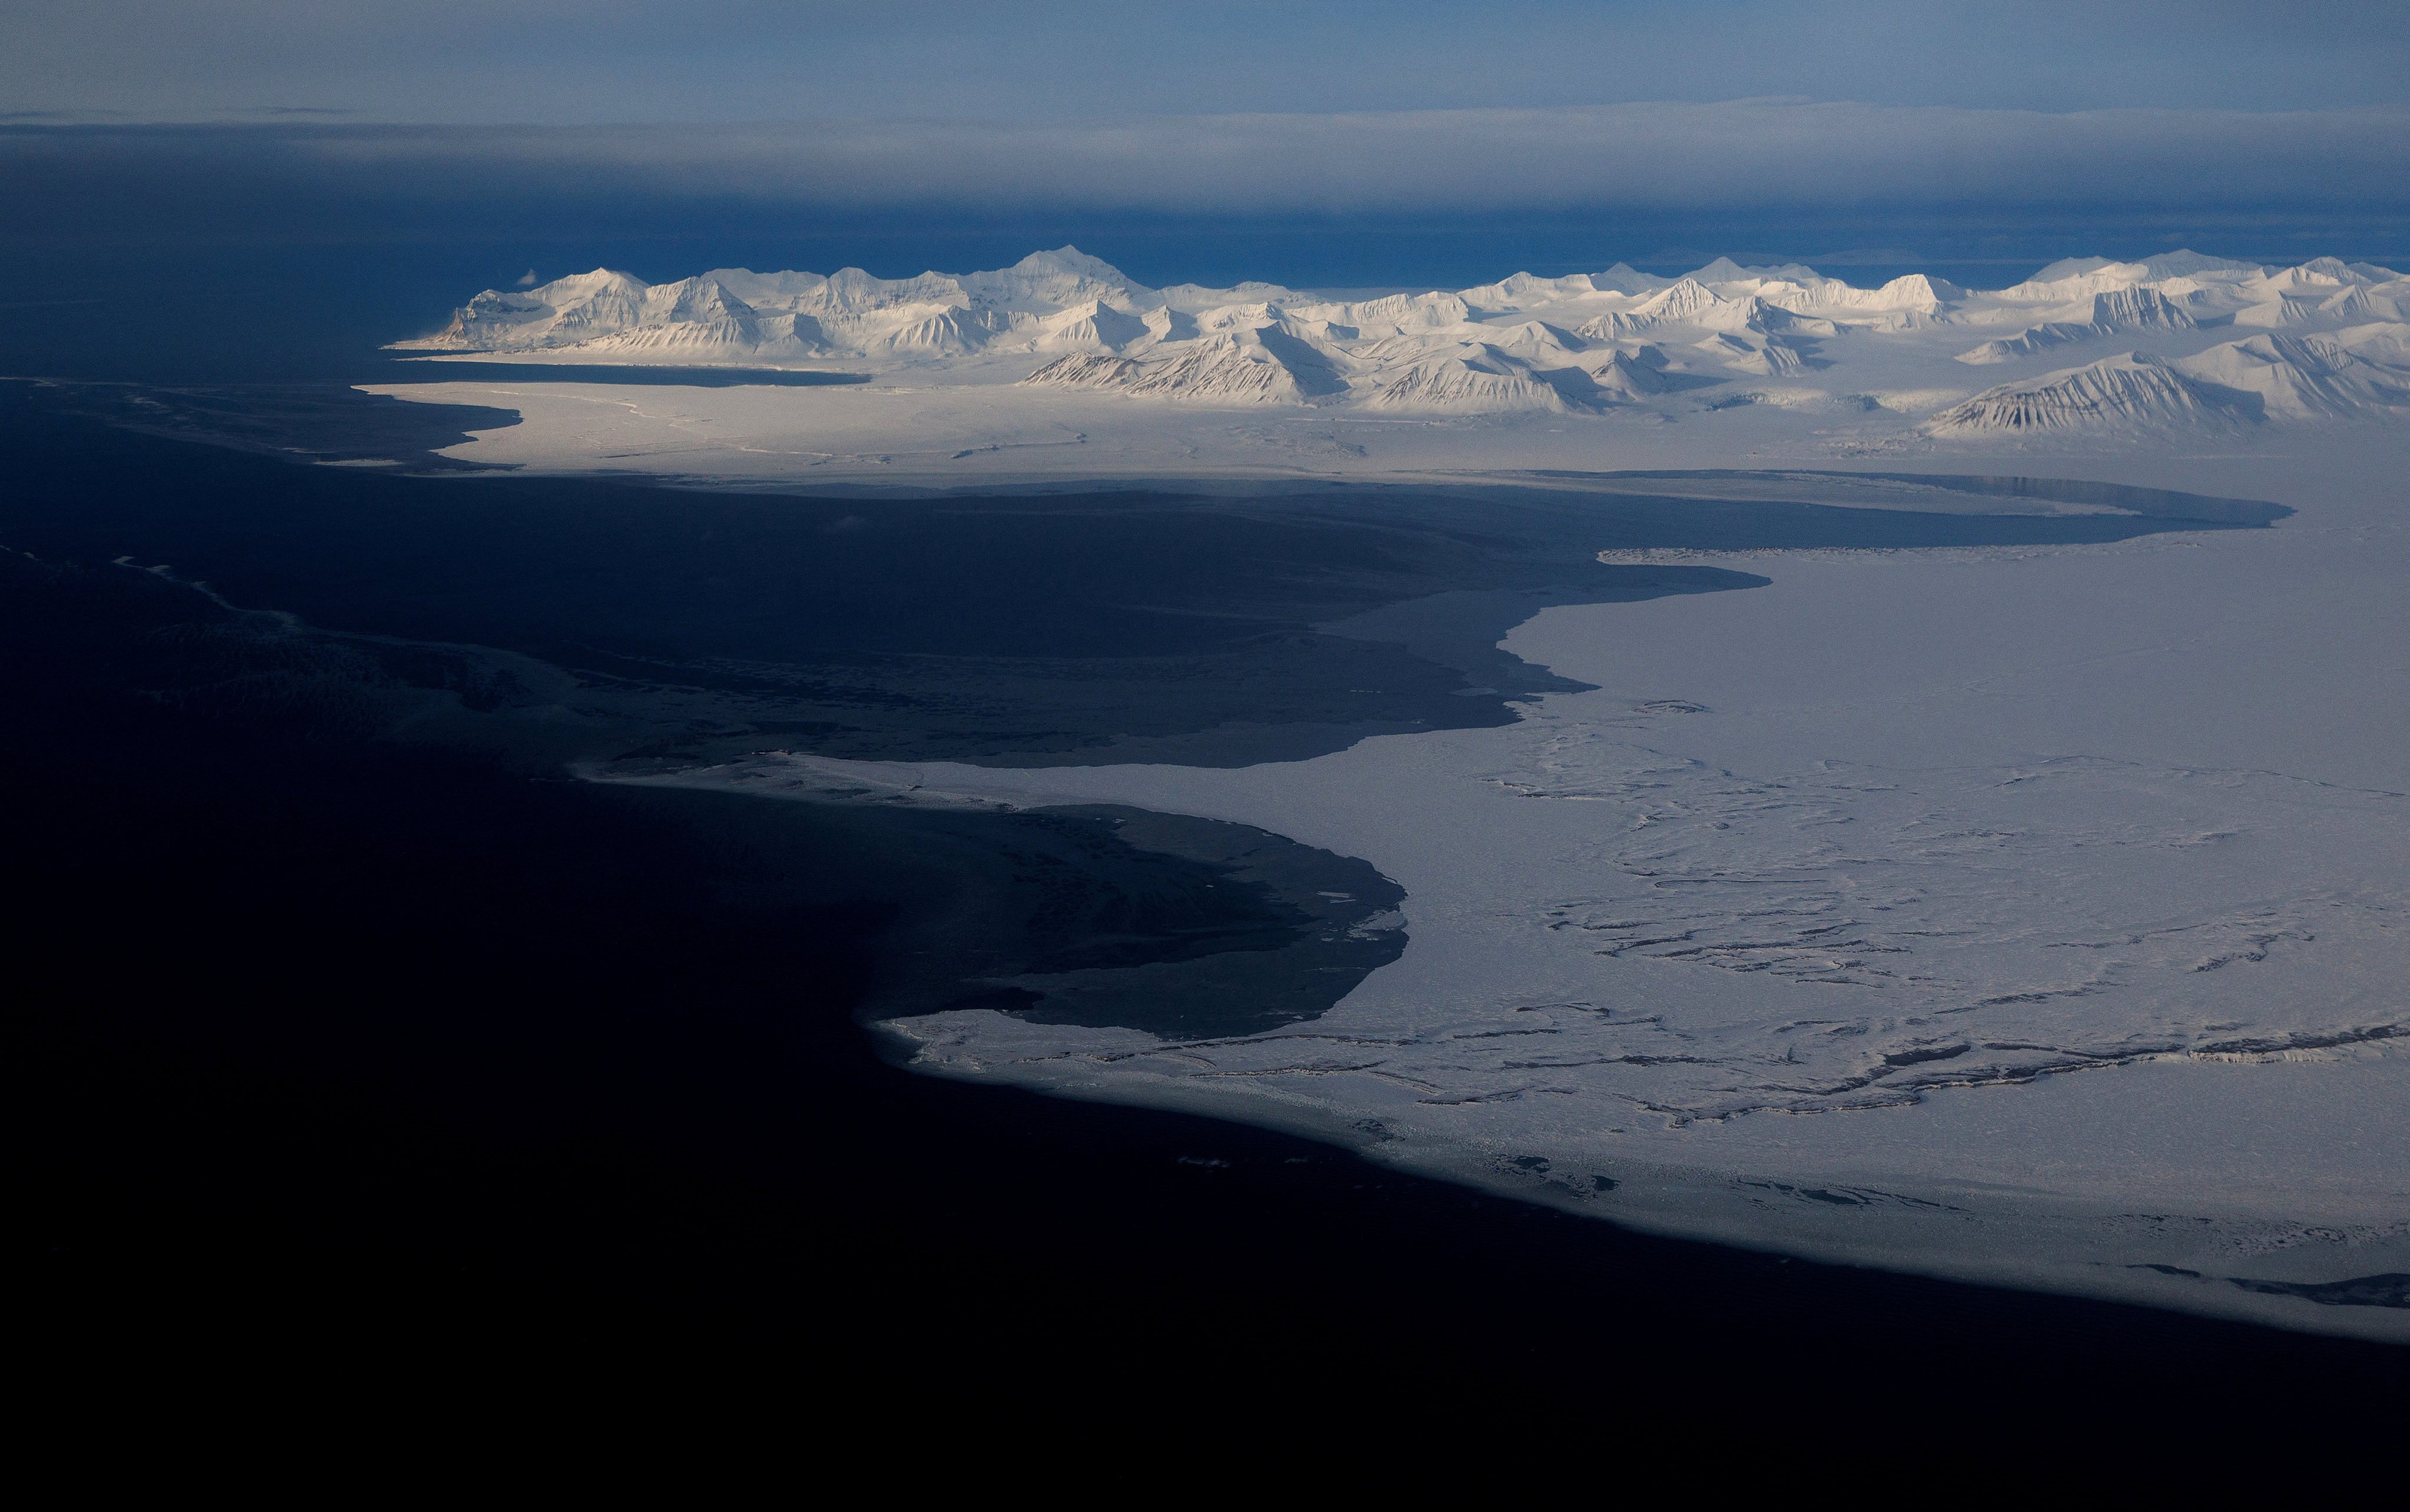 The snowcapped mountains of Svalbard near Longyearbyen, the archipelago’s main town. Photo: Reuters